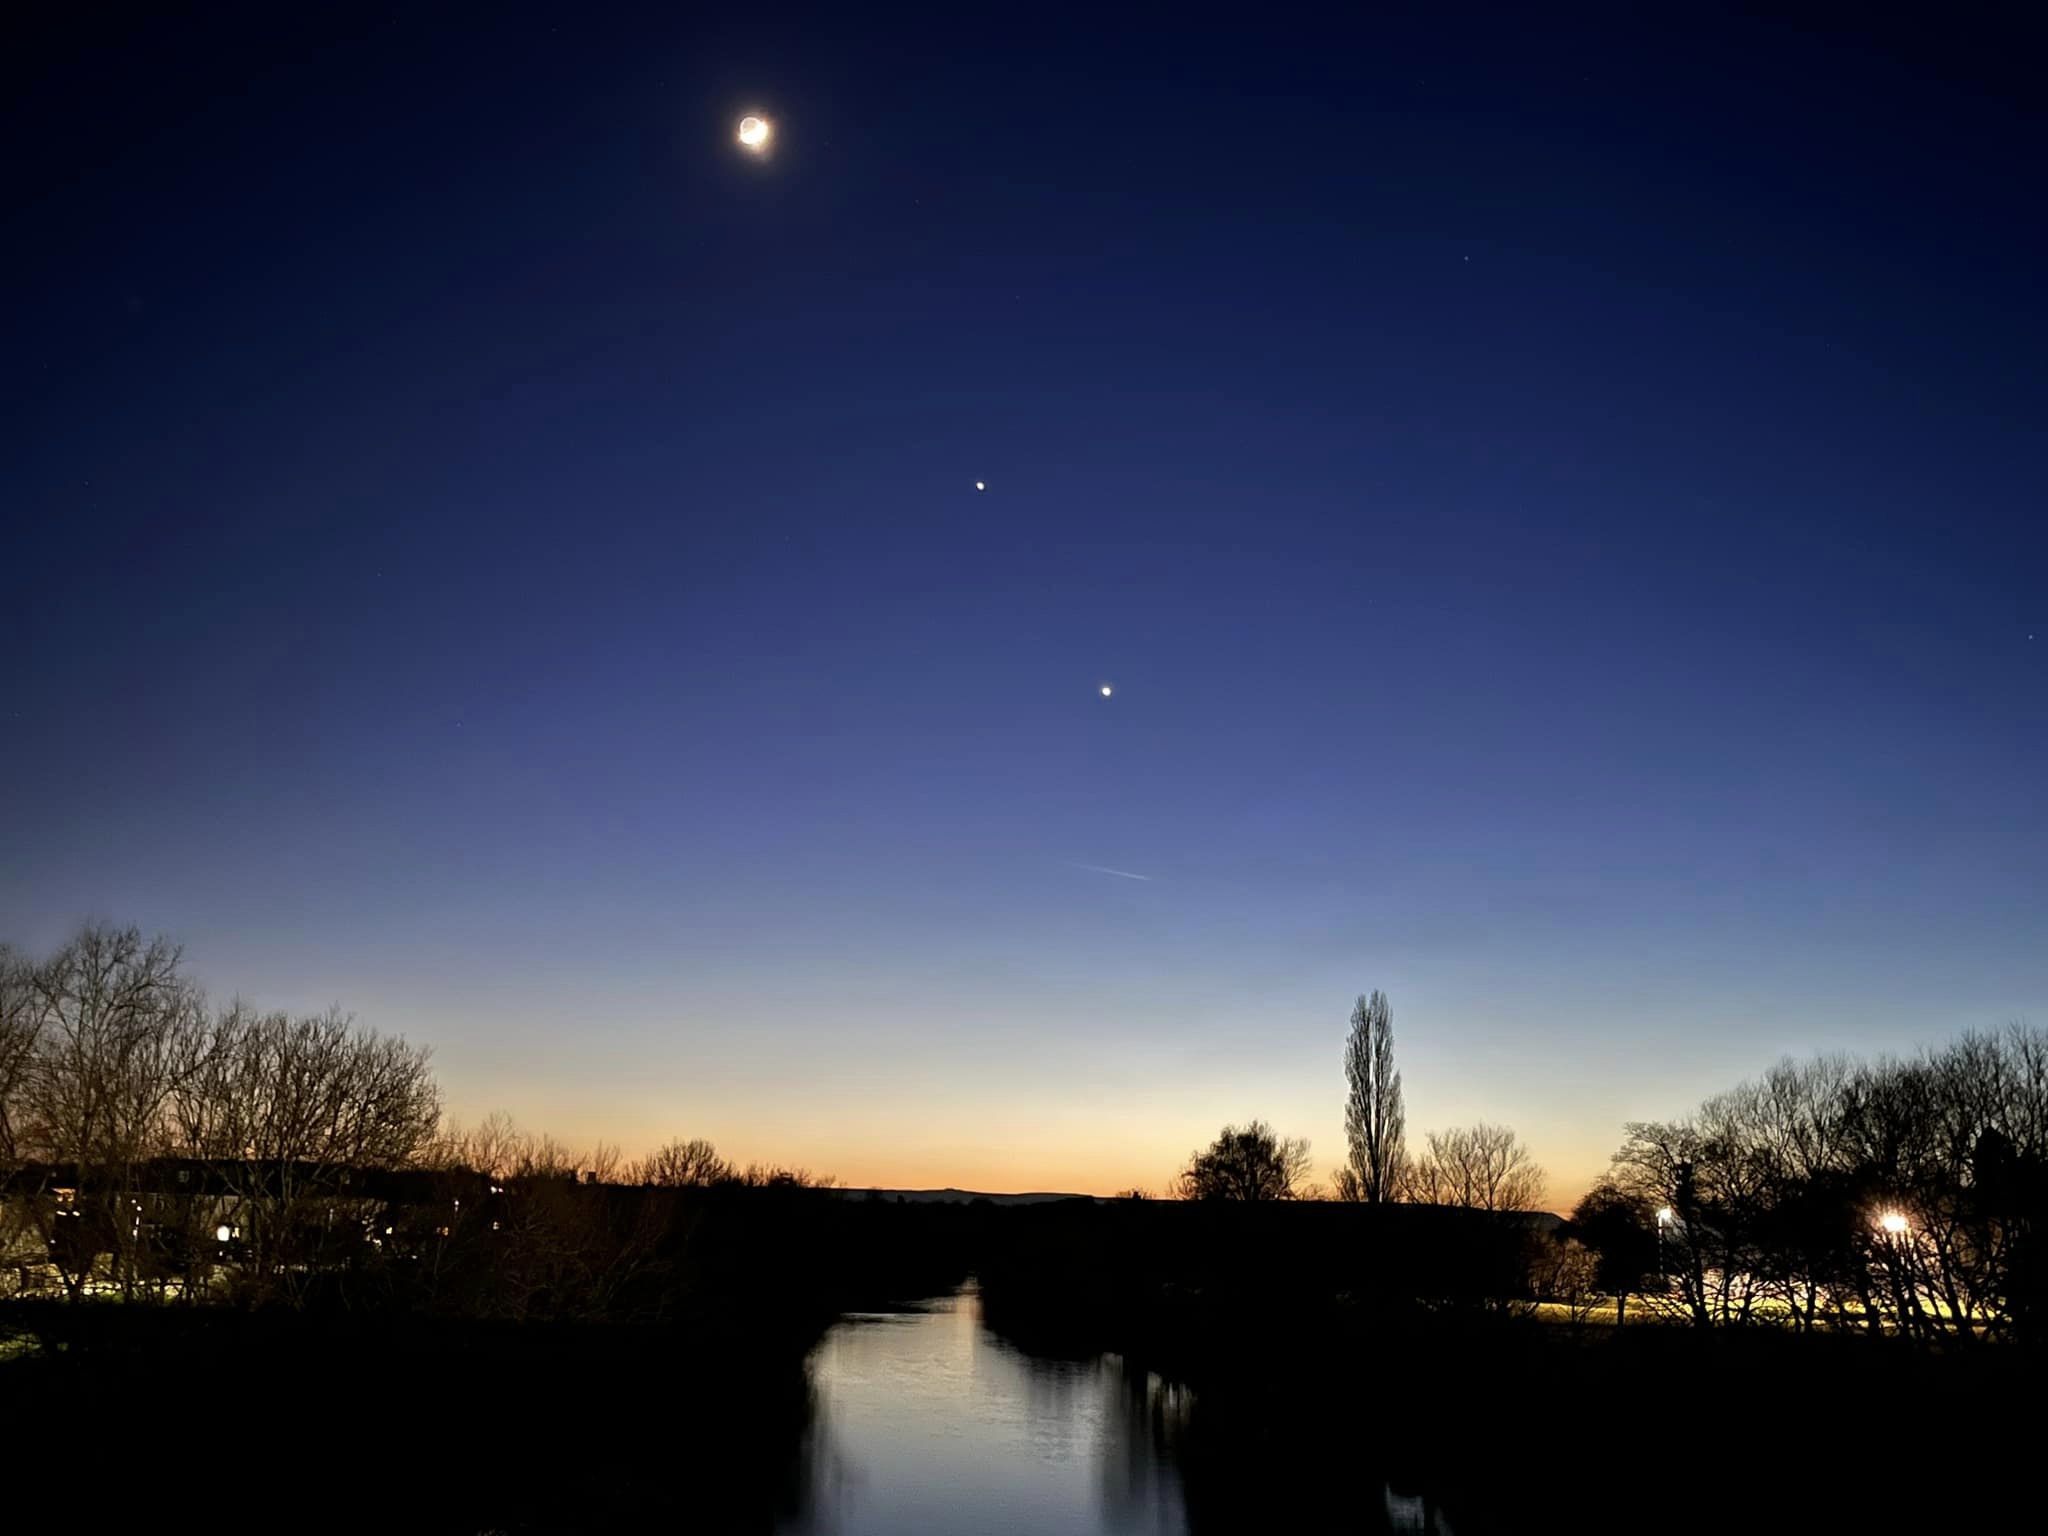 Moon meets Venus and Jupiter in conjunction, as seen over the river Wye in Hereford. Picture: Lorne Wilden/Hereford Times Camera Club